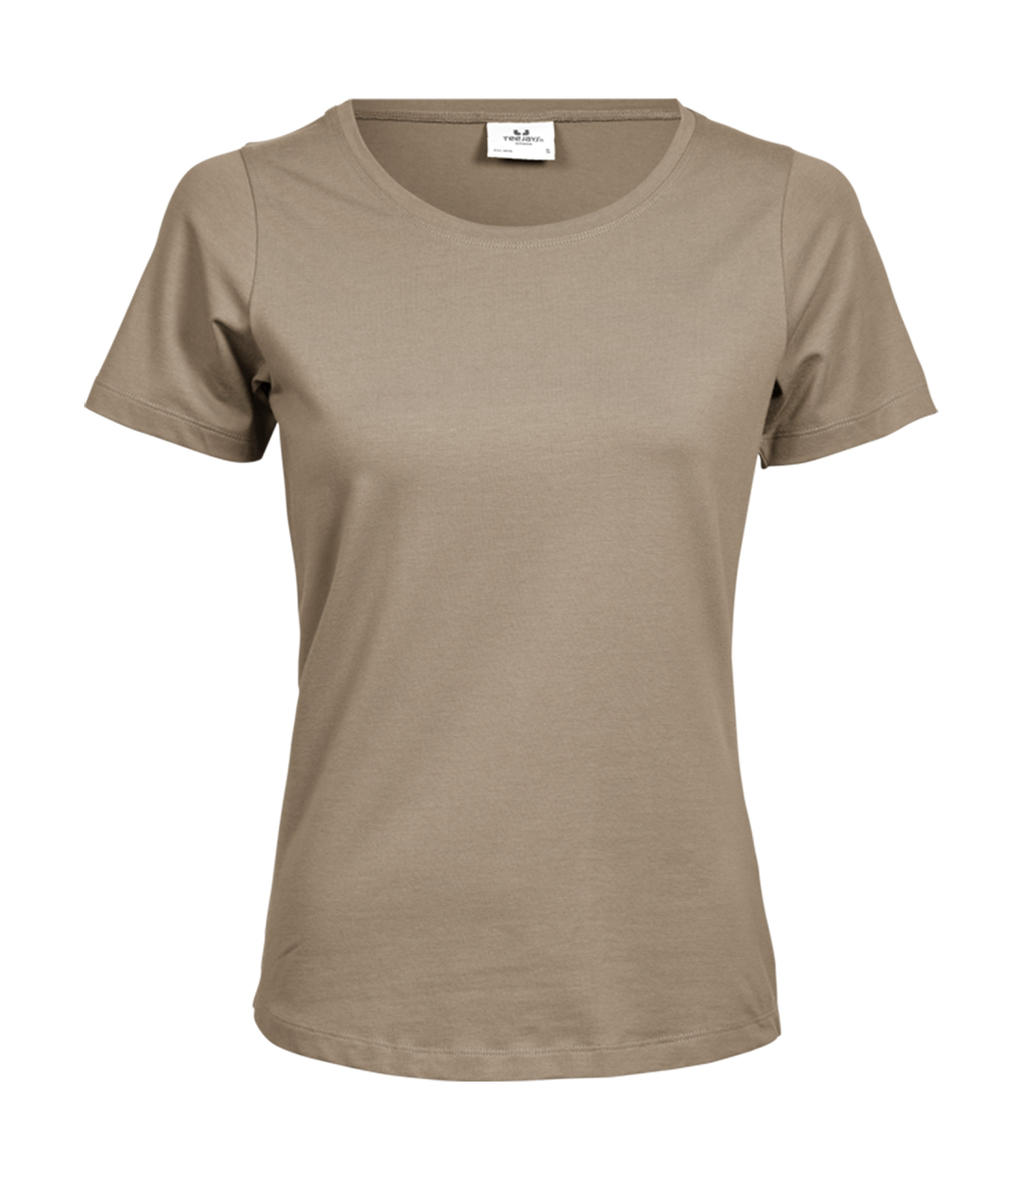  Ladies Stretch Tee in Farbe Kit